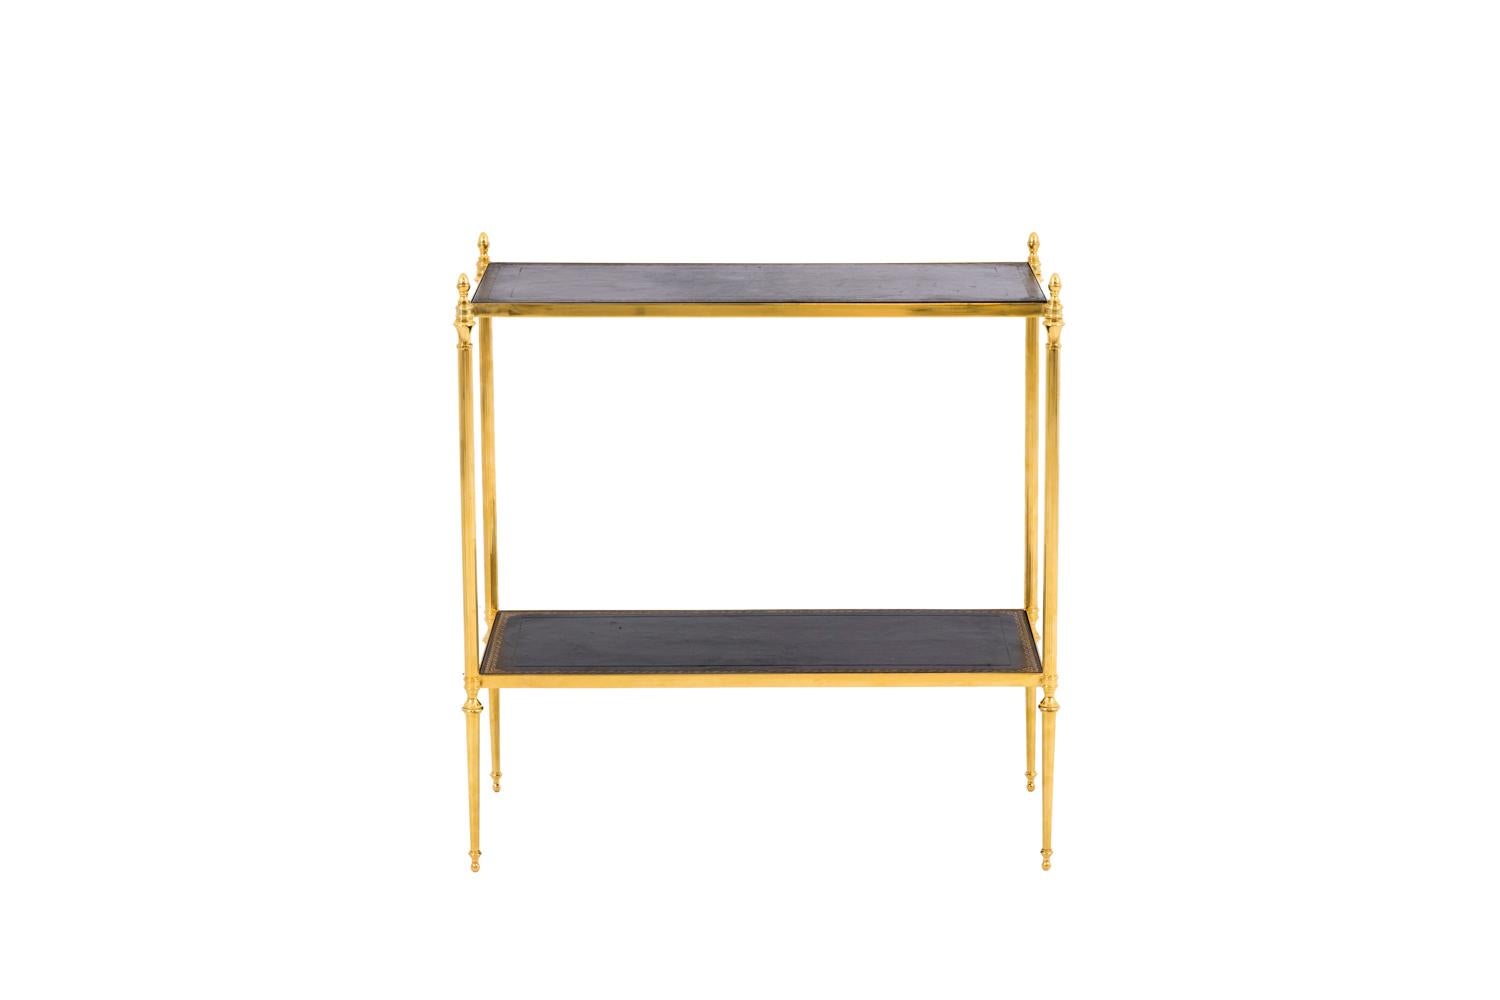 Maison Jansen, in the style of.
Pair of end tables in gilt brass standing on four fluted legs topped by acorns and finishing in tapered legs.
Two movable trays in black leather hit with small gilt irons by a scrolls frieze and framed by gilt brass